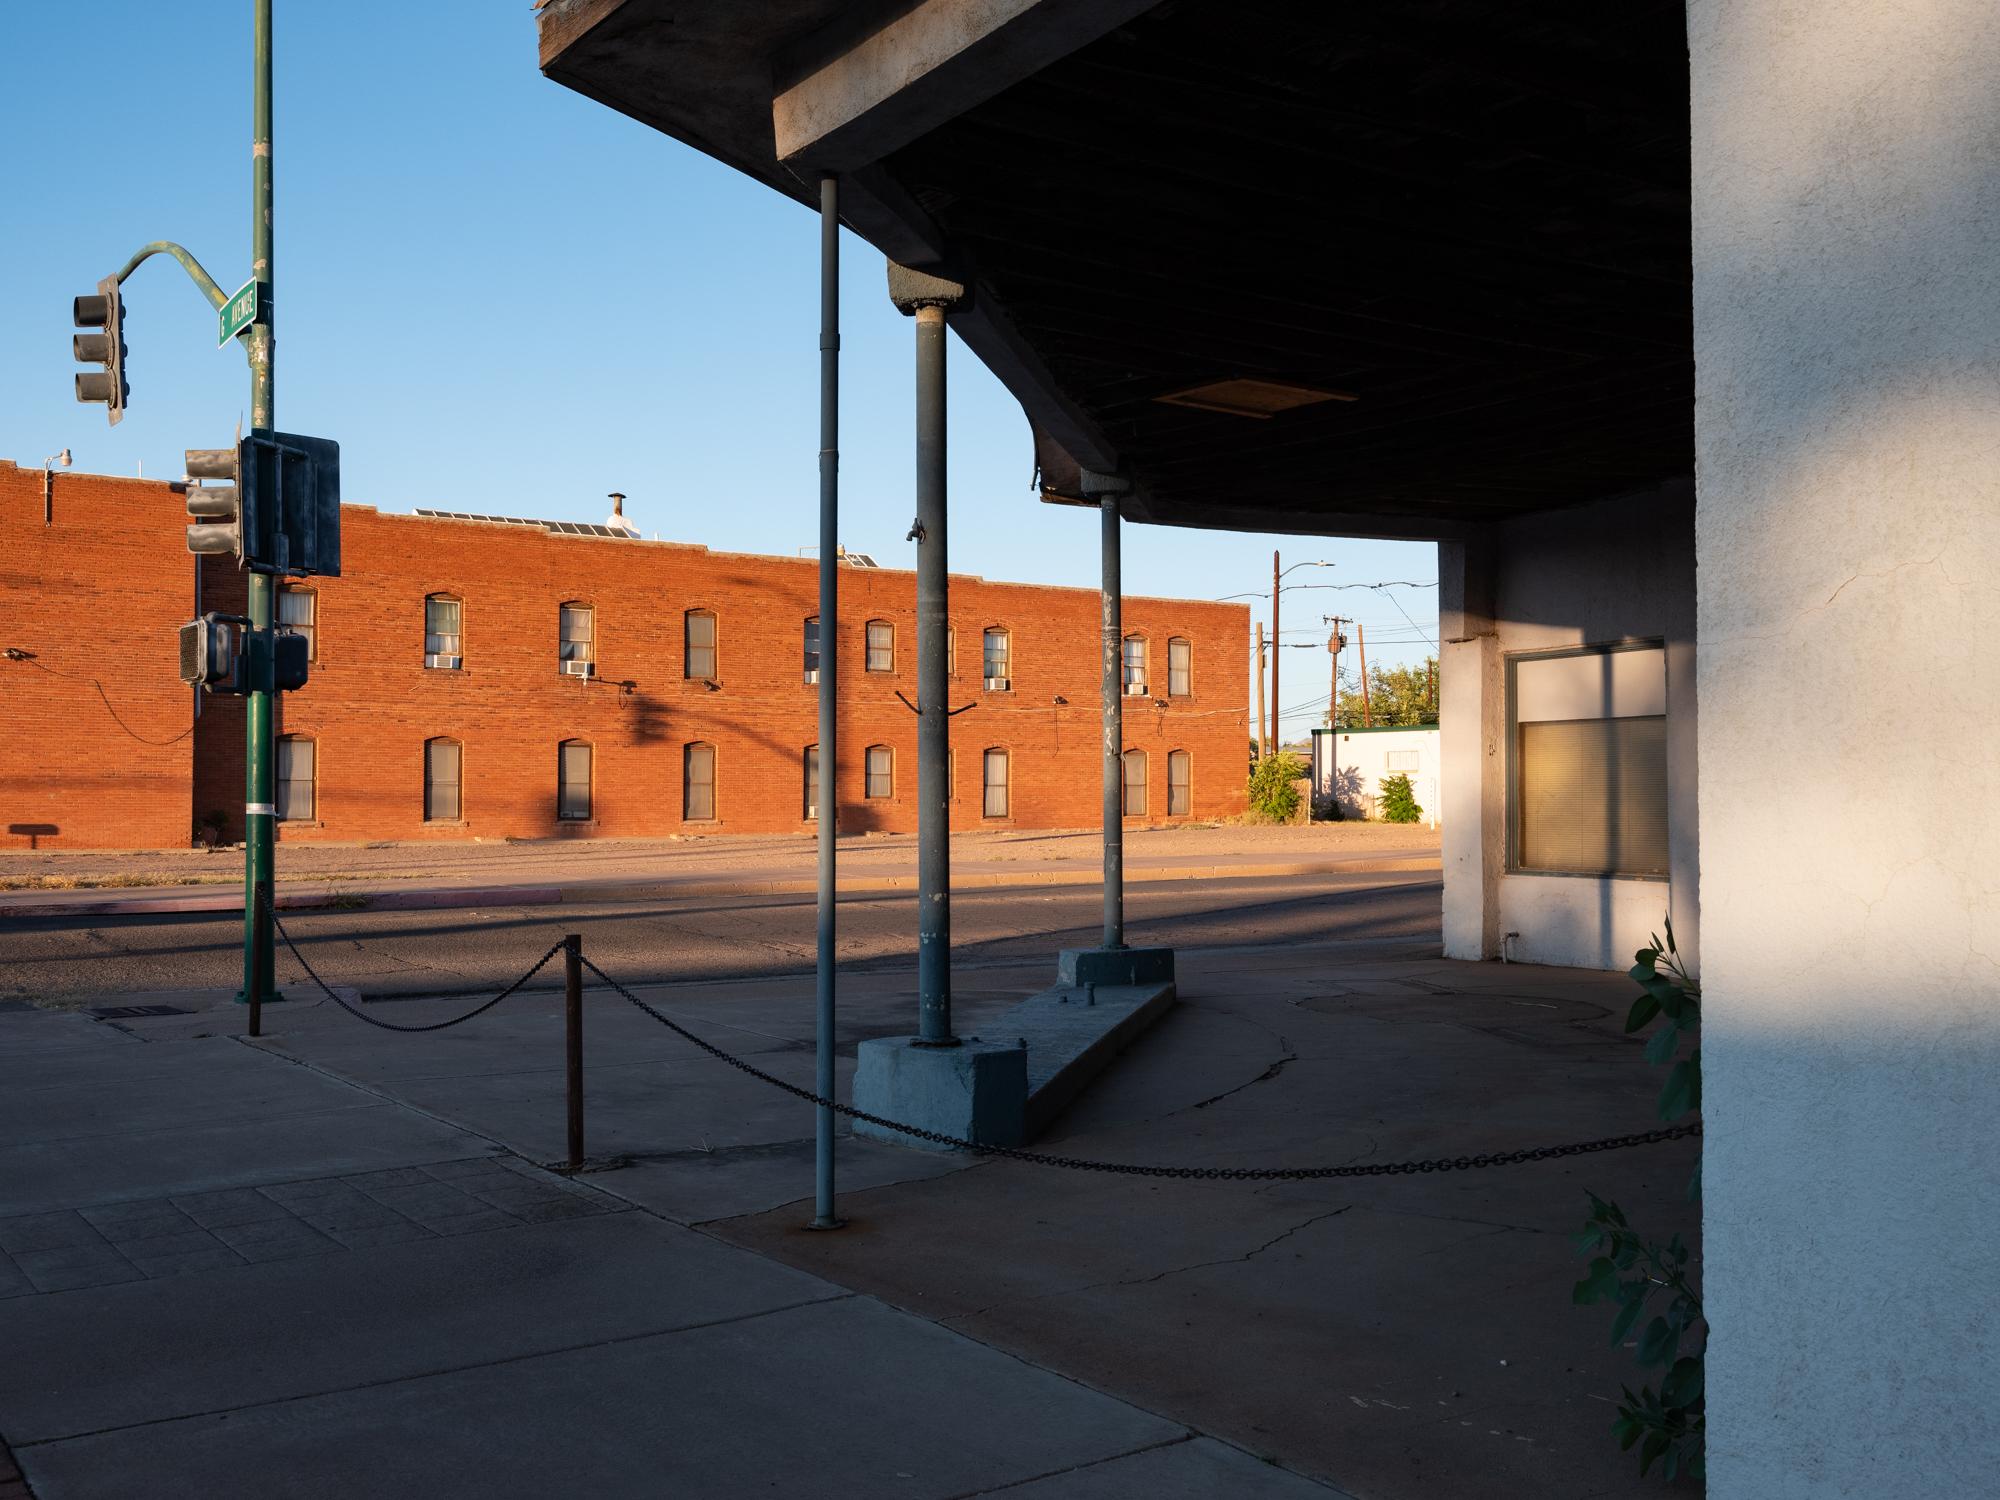 Social Media Migrant Smuggling - Bloomberg Businessweek - Buildings in the historic section of Douglas, AZ, on the...